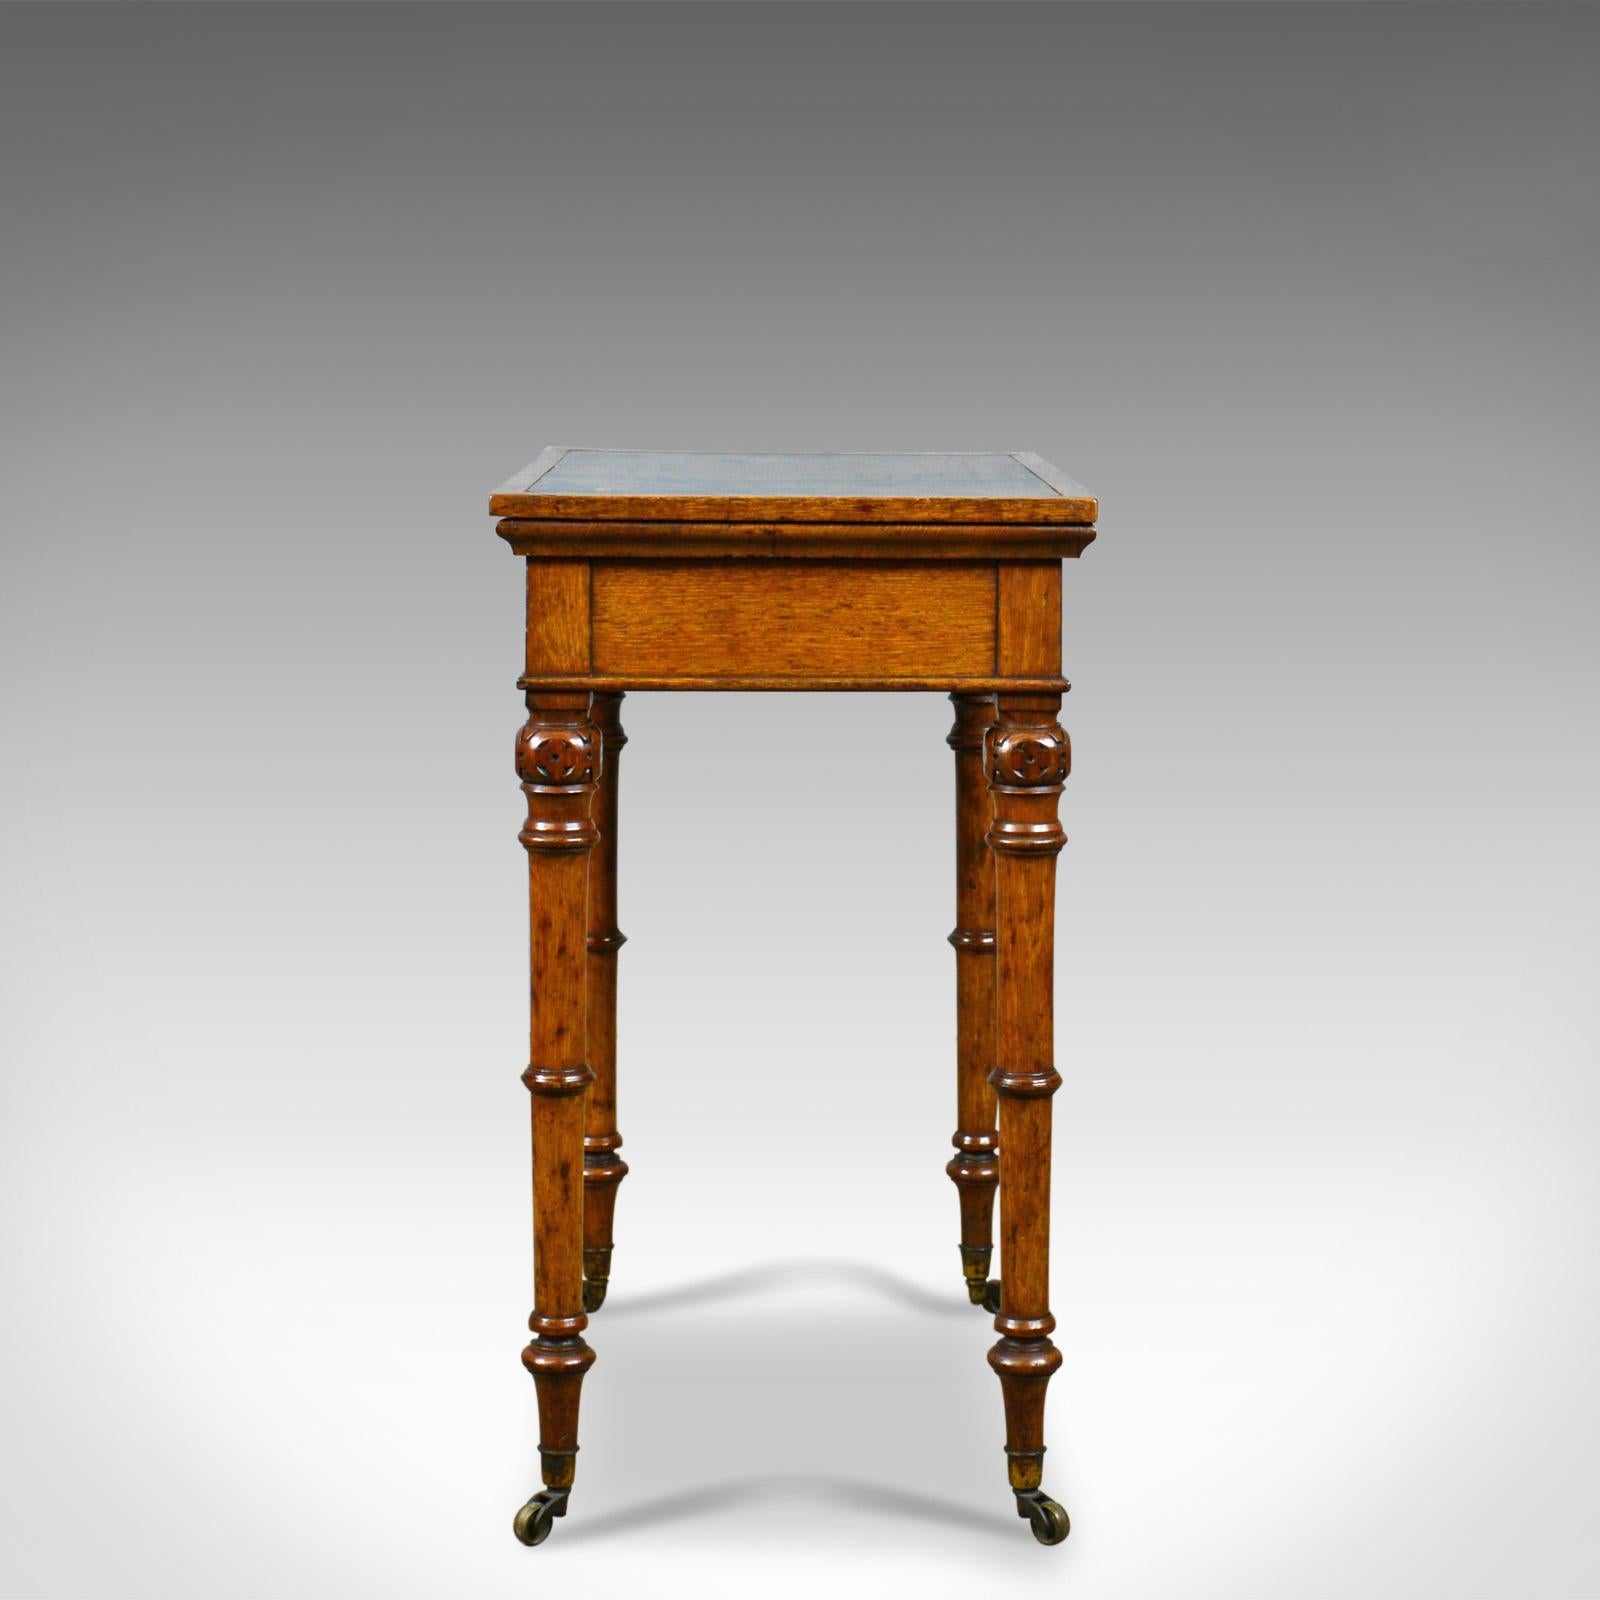 Victorian Antique, Adjustable Writing Table, English, Oak, Johnstone and Jeanes circa 1850